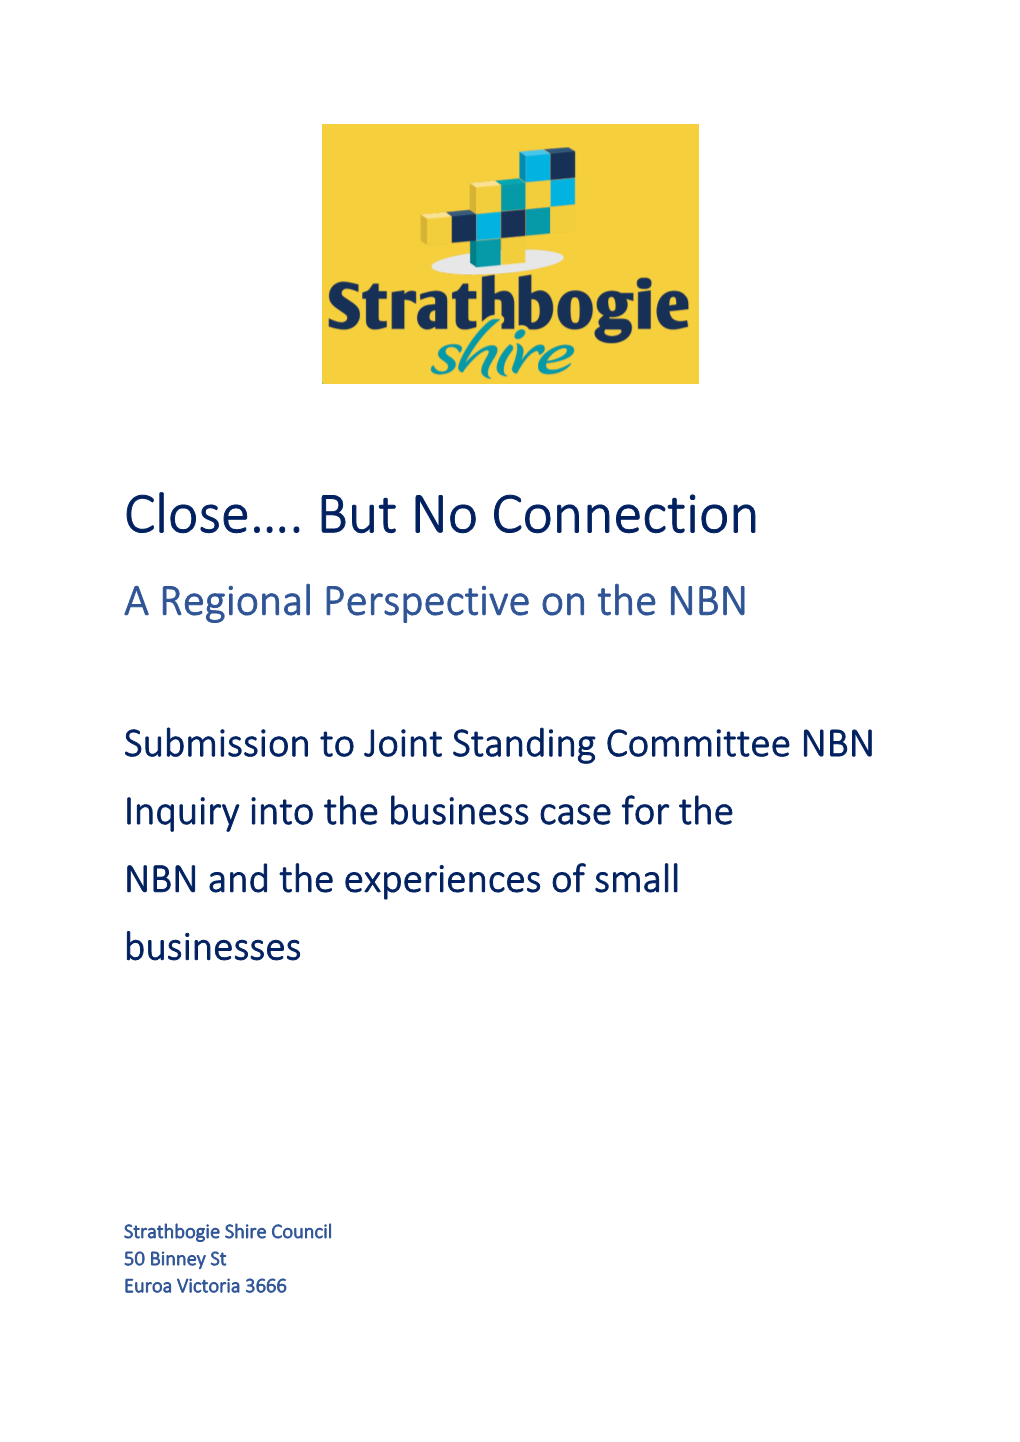 Close…. but No Connection a Regional Perspective on the NBN